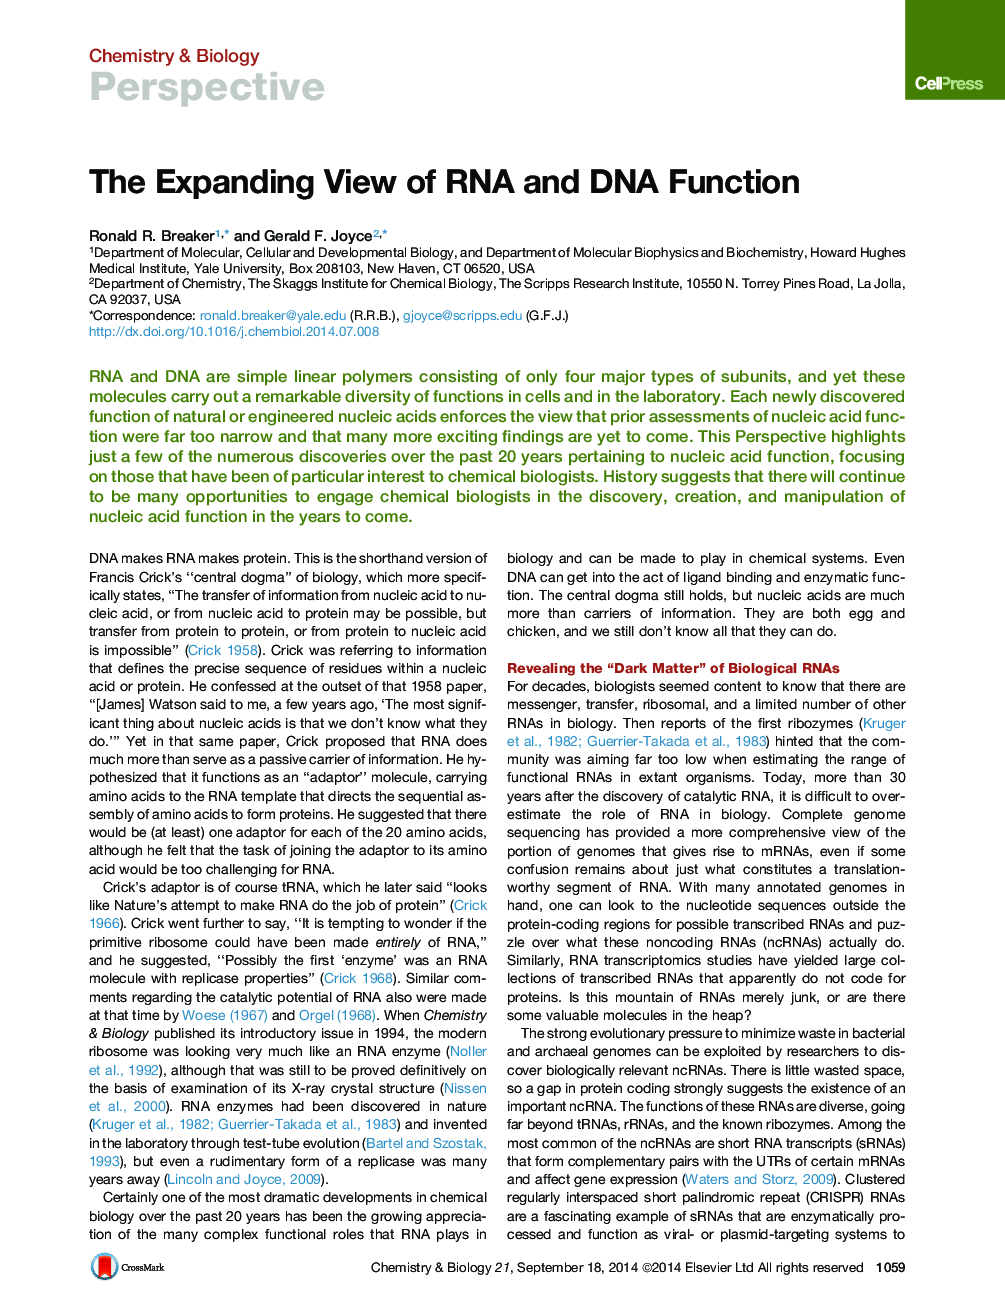 The Expanding View of RNA and DNA Function